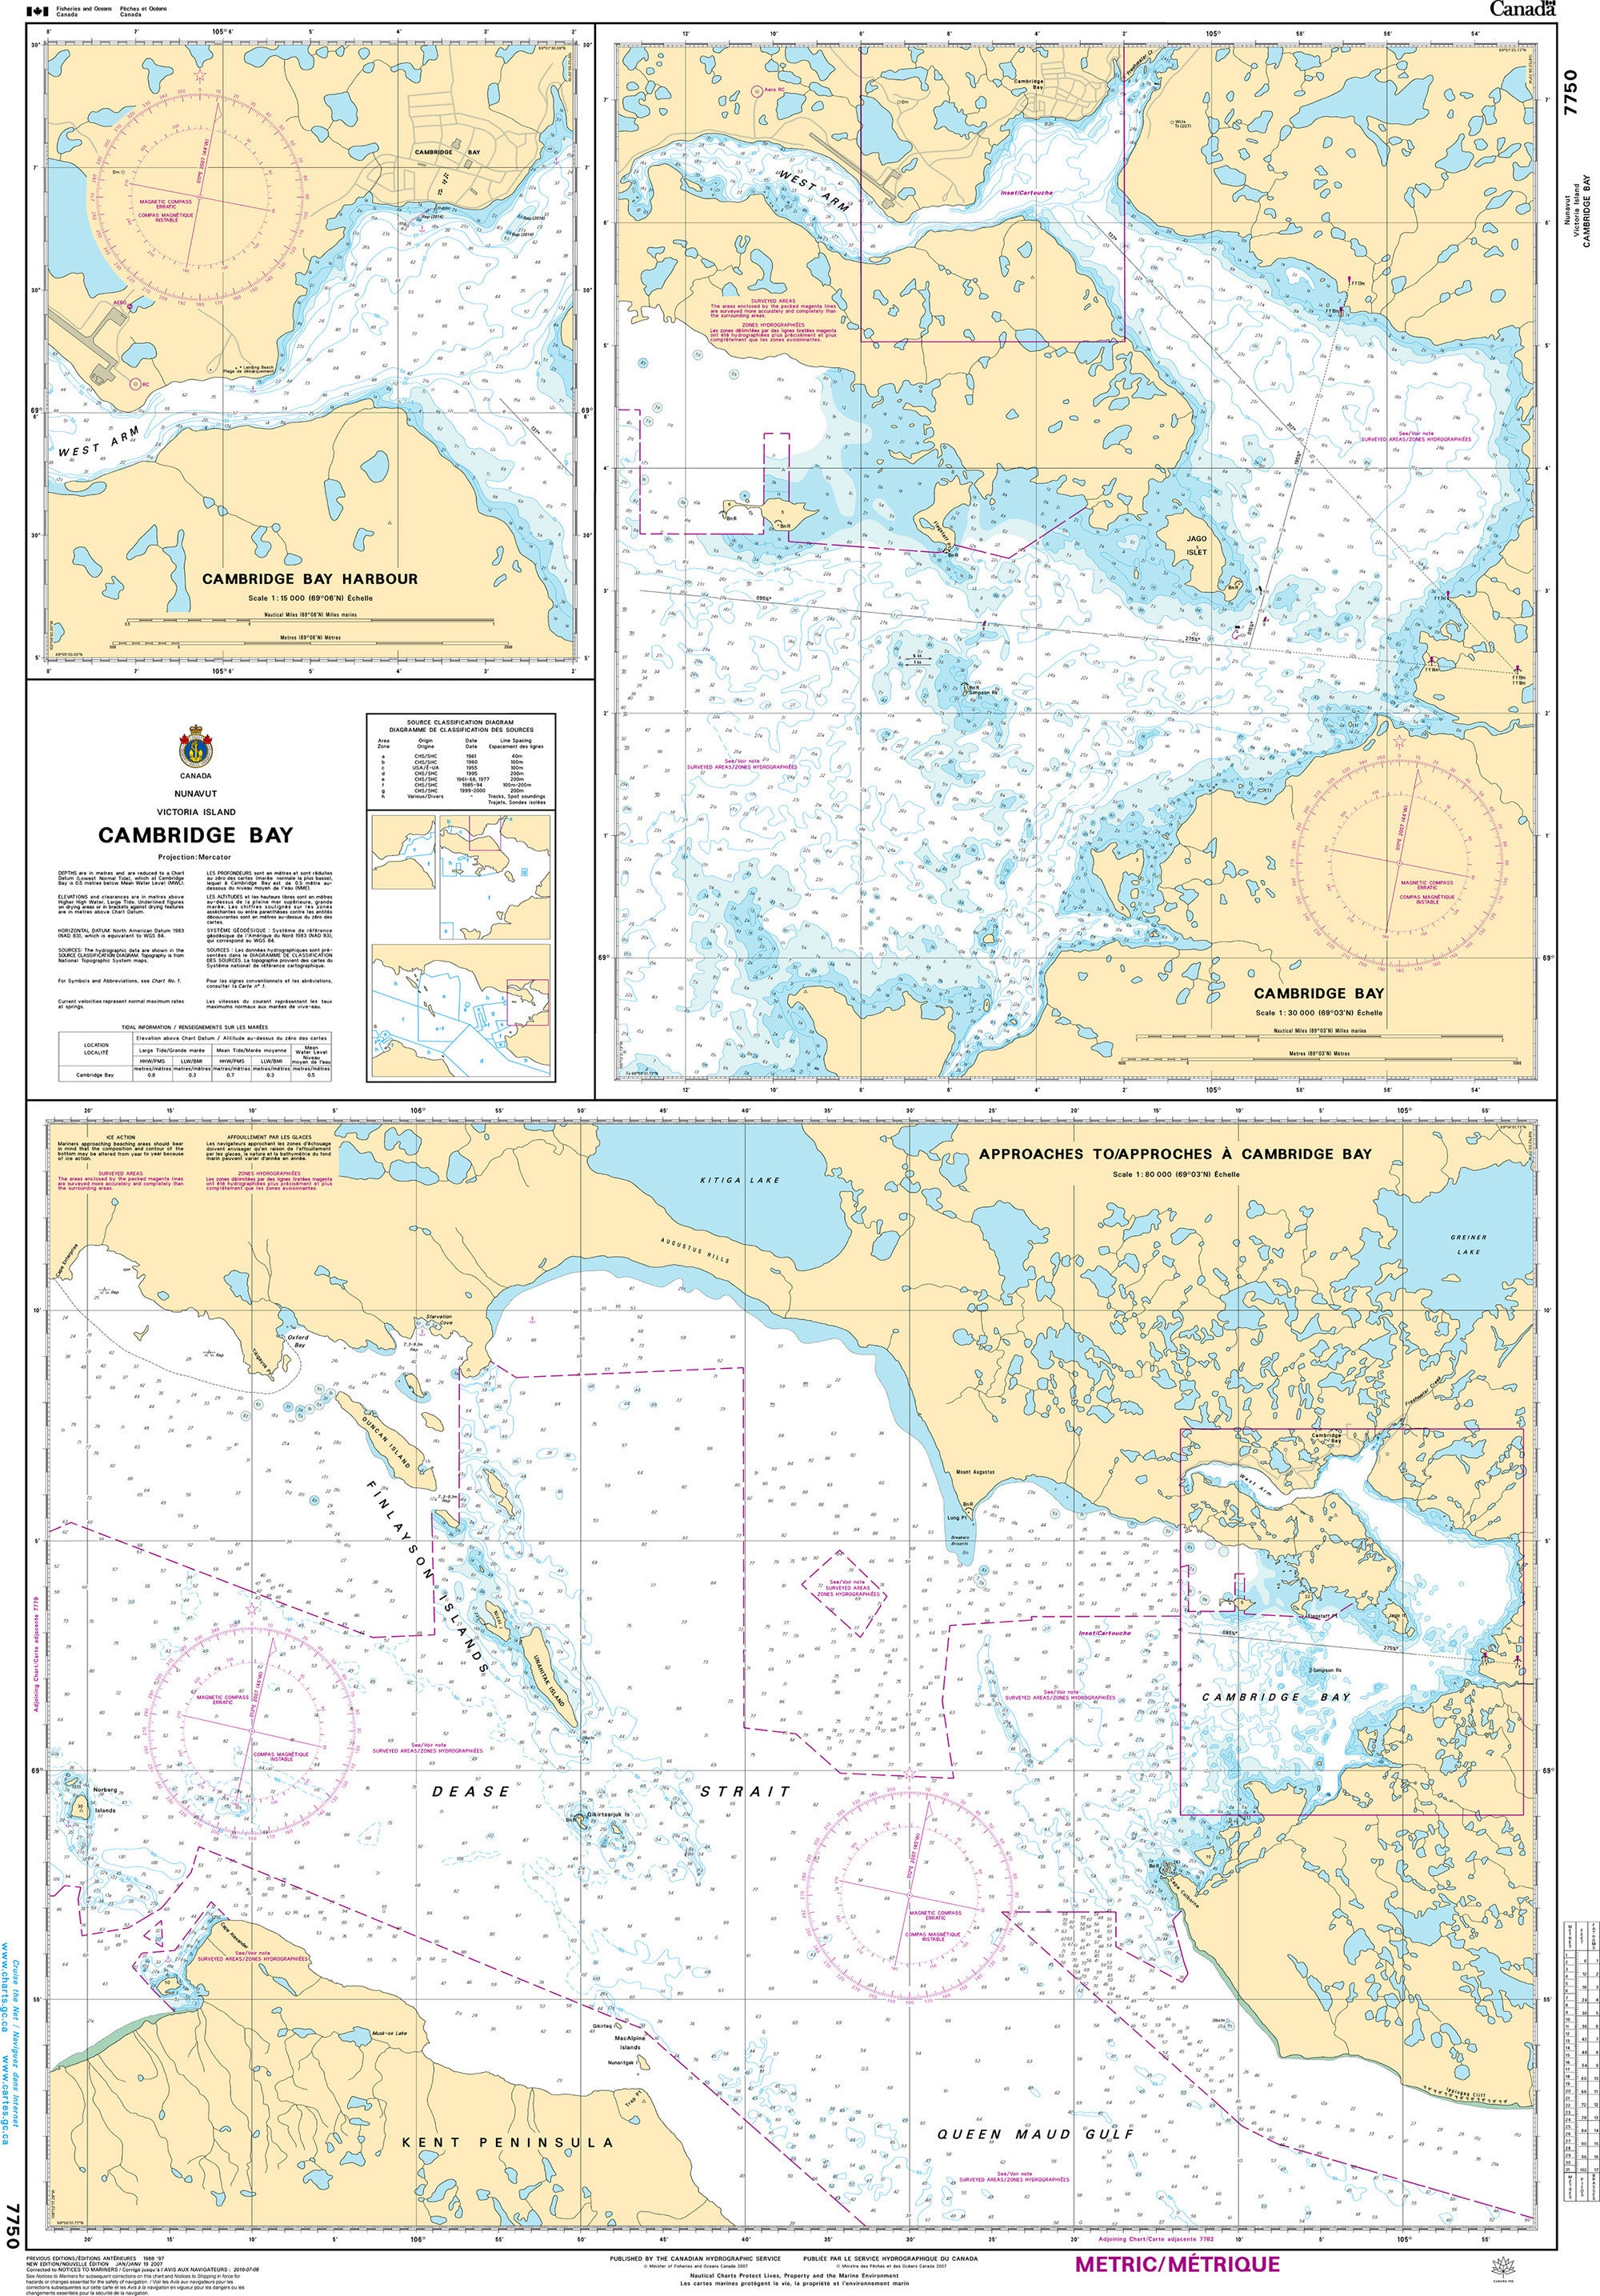 Canadian Hydrographic Service Nautical Chart CHS7750: Approaches to/Approches à Cambridge Bay